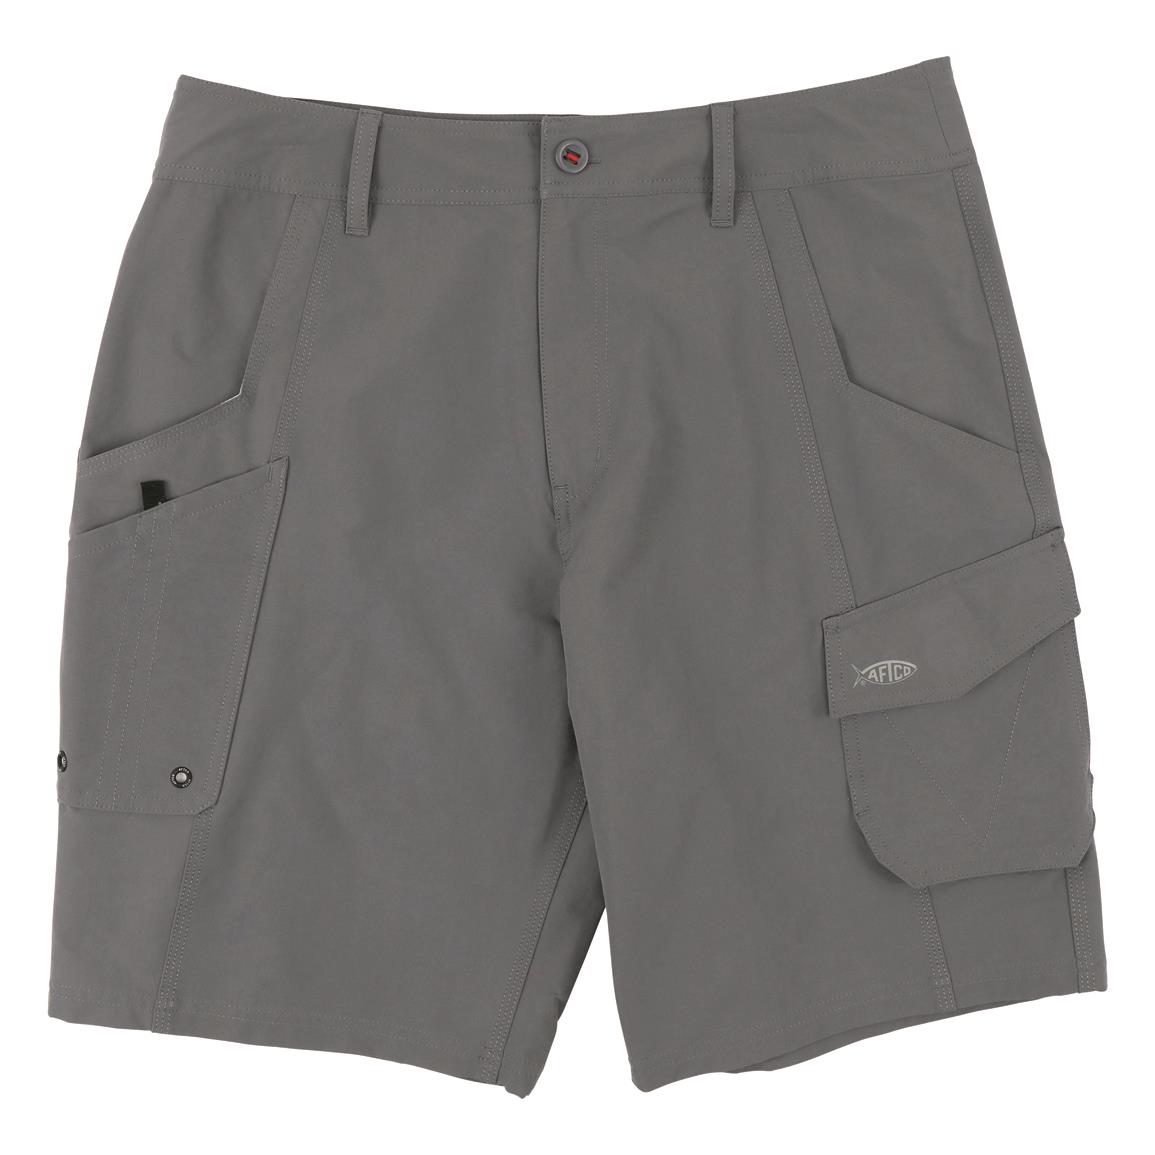 AFTCO Stealth Fishing Shorts, Charcoal